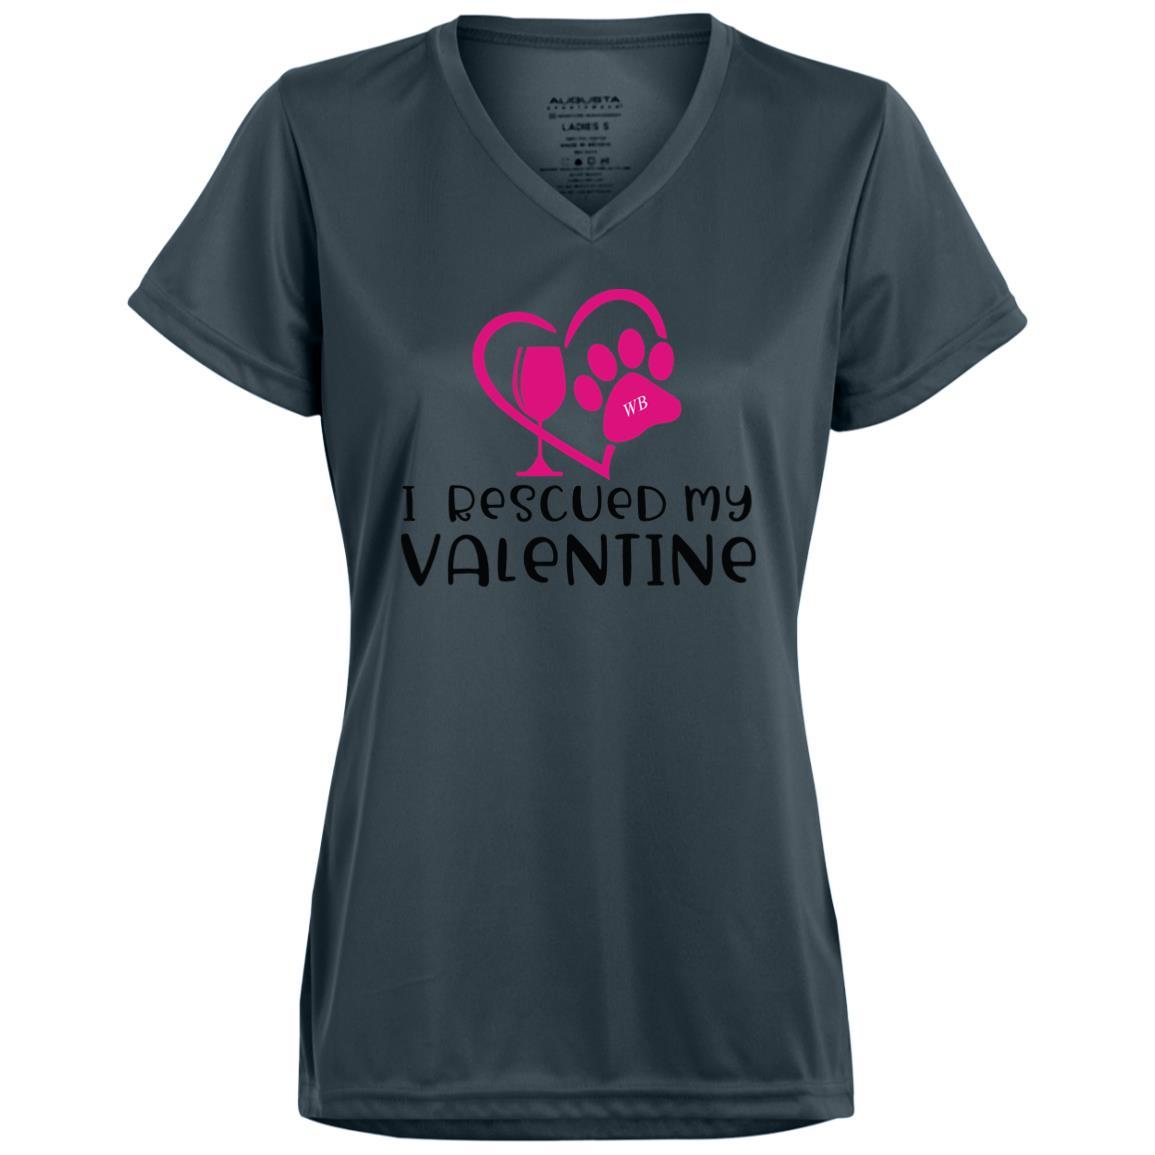 T-Shirts Graphite / X-Small Winey Bitches Co "I Rescued My Valentine" Ladies' Wicking T-Shirt WineyBitchesCo